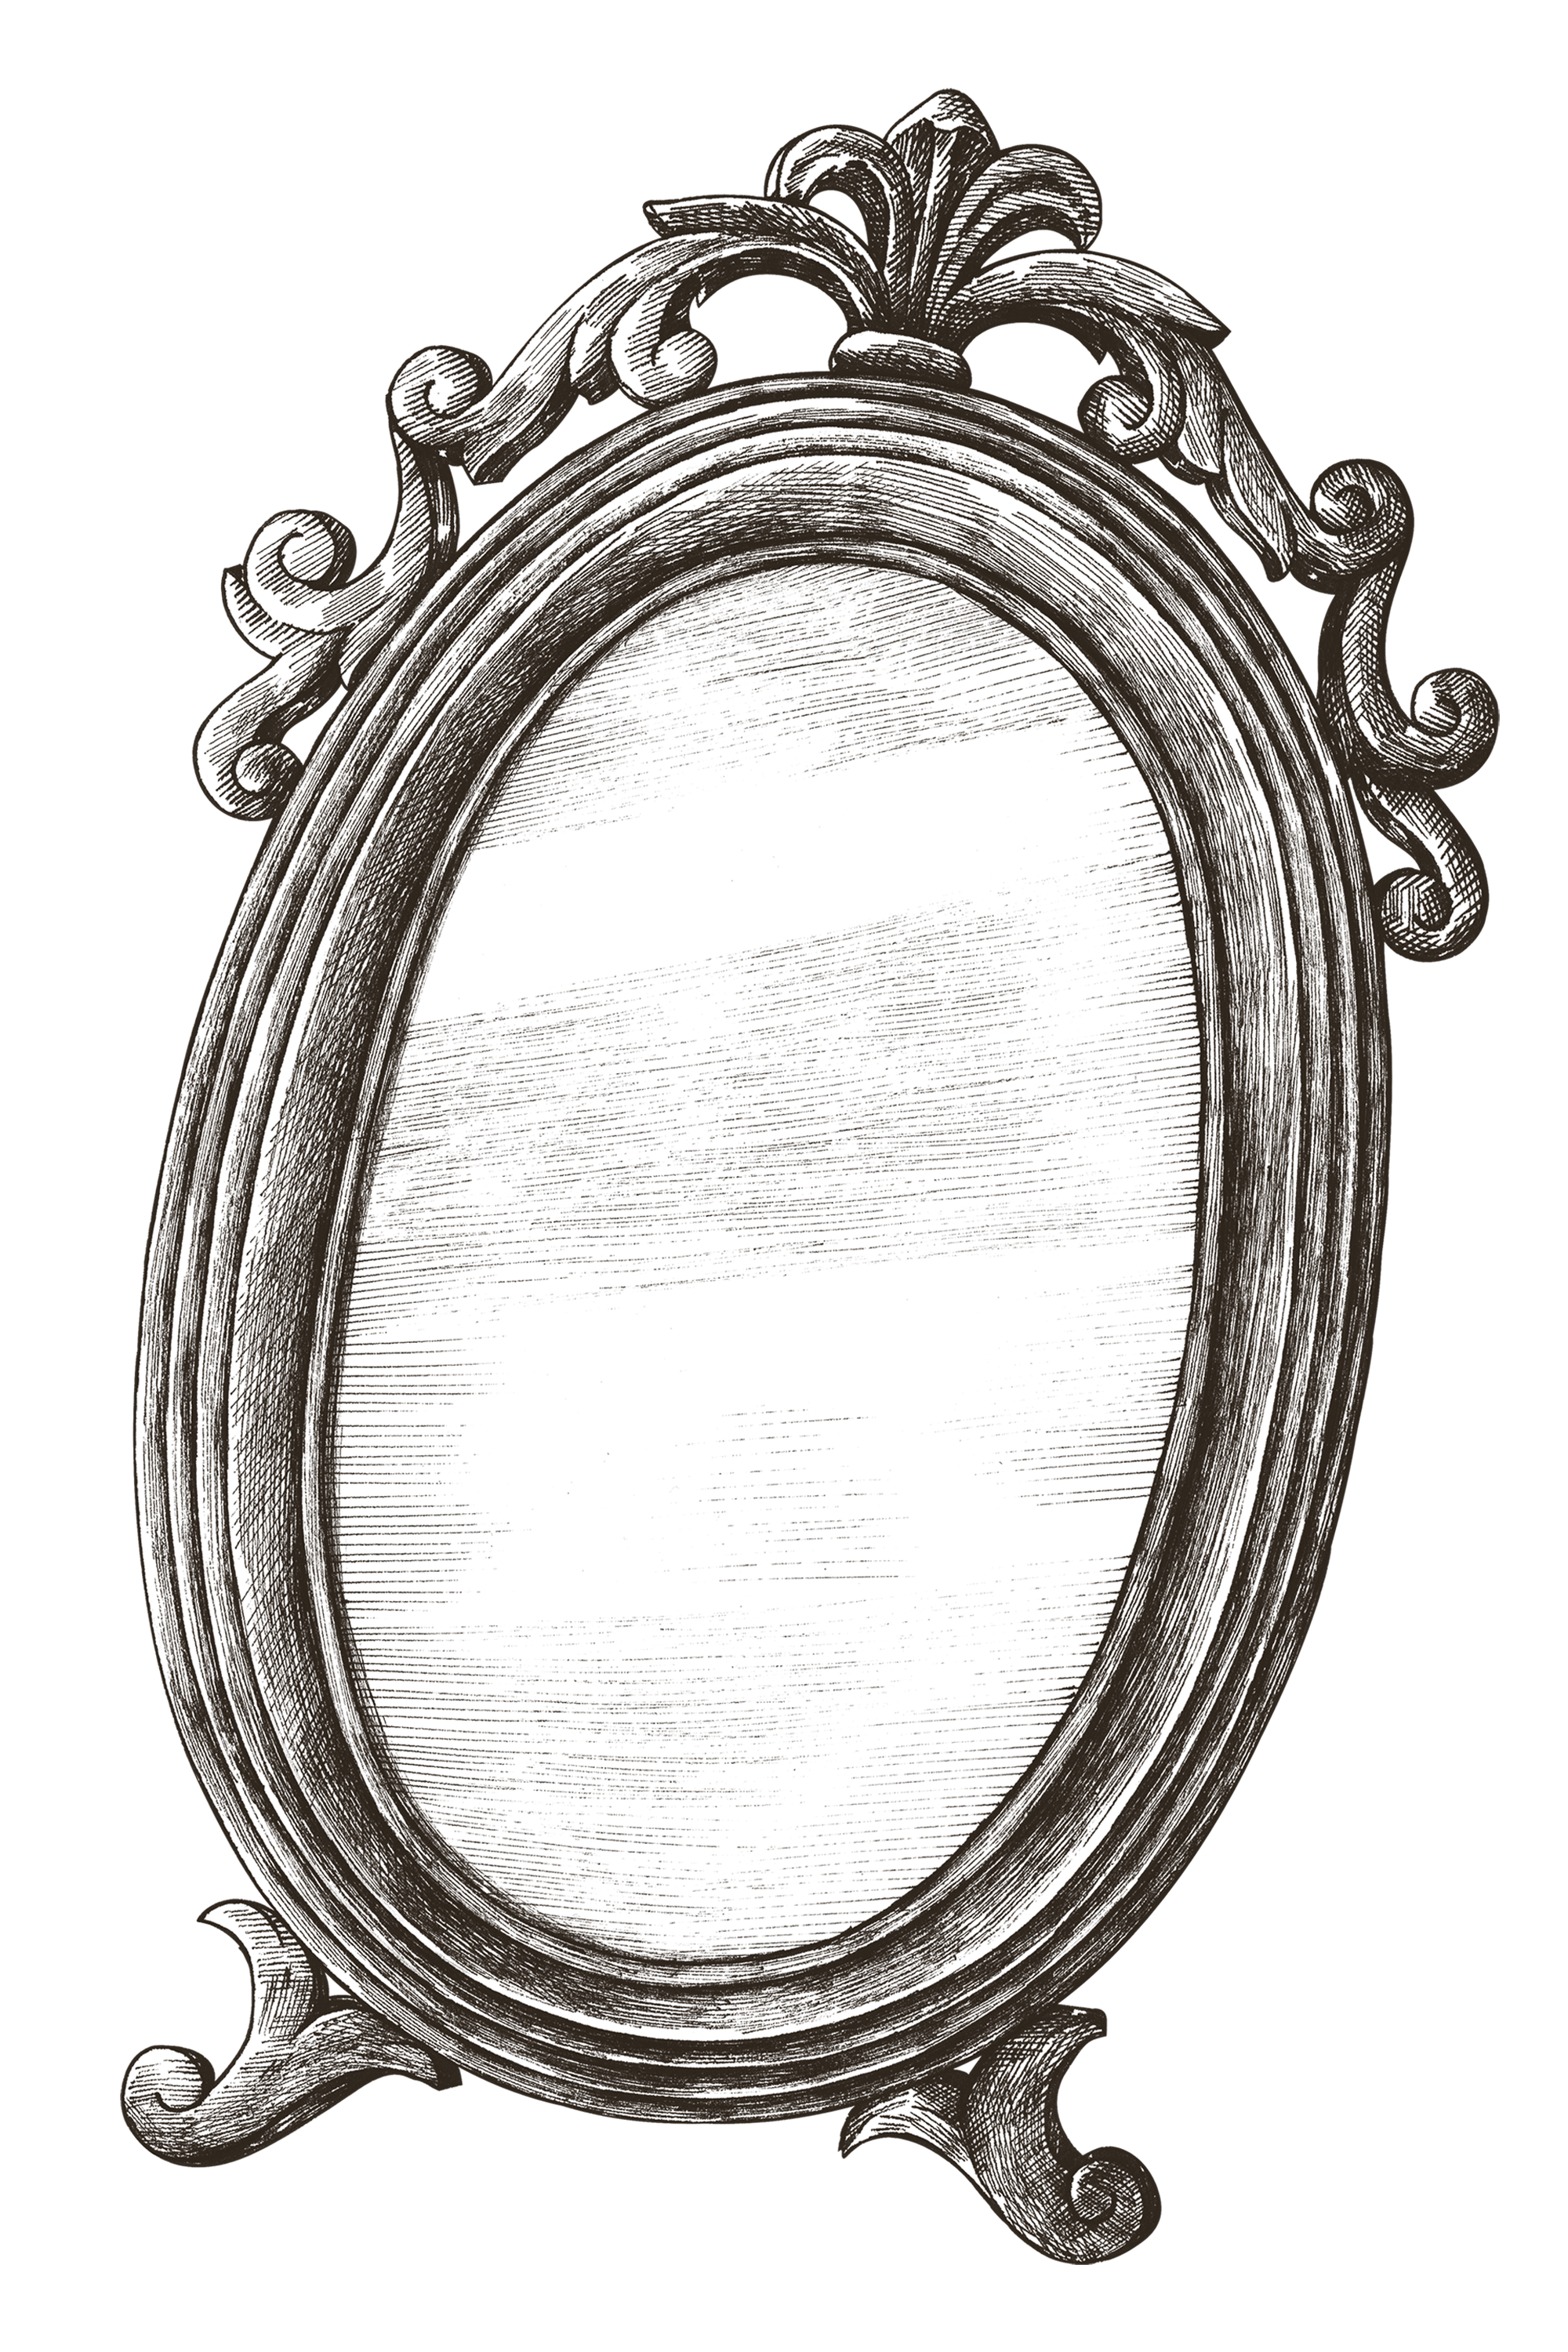 An old oval mirror